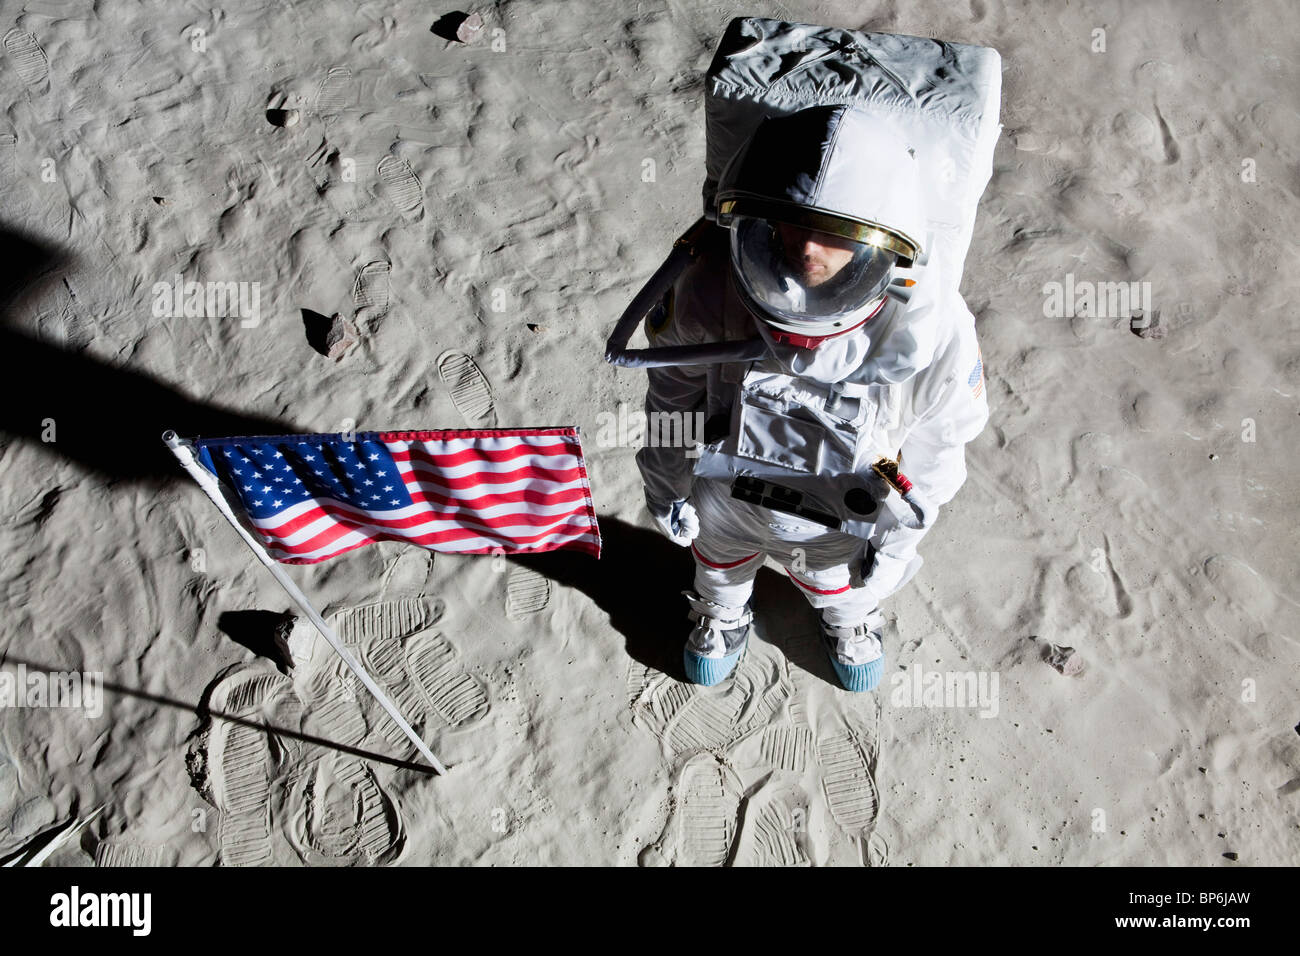 An astronaut on the surface of the moon next to an American flag Stock Photo